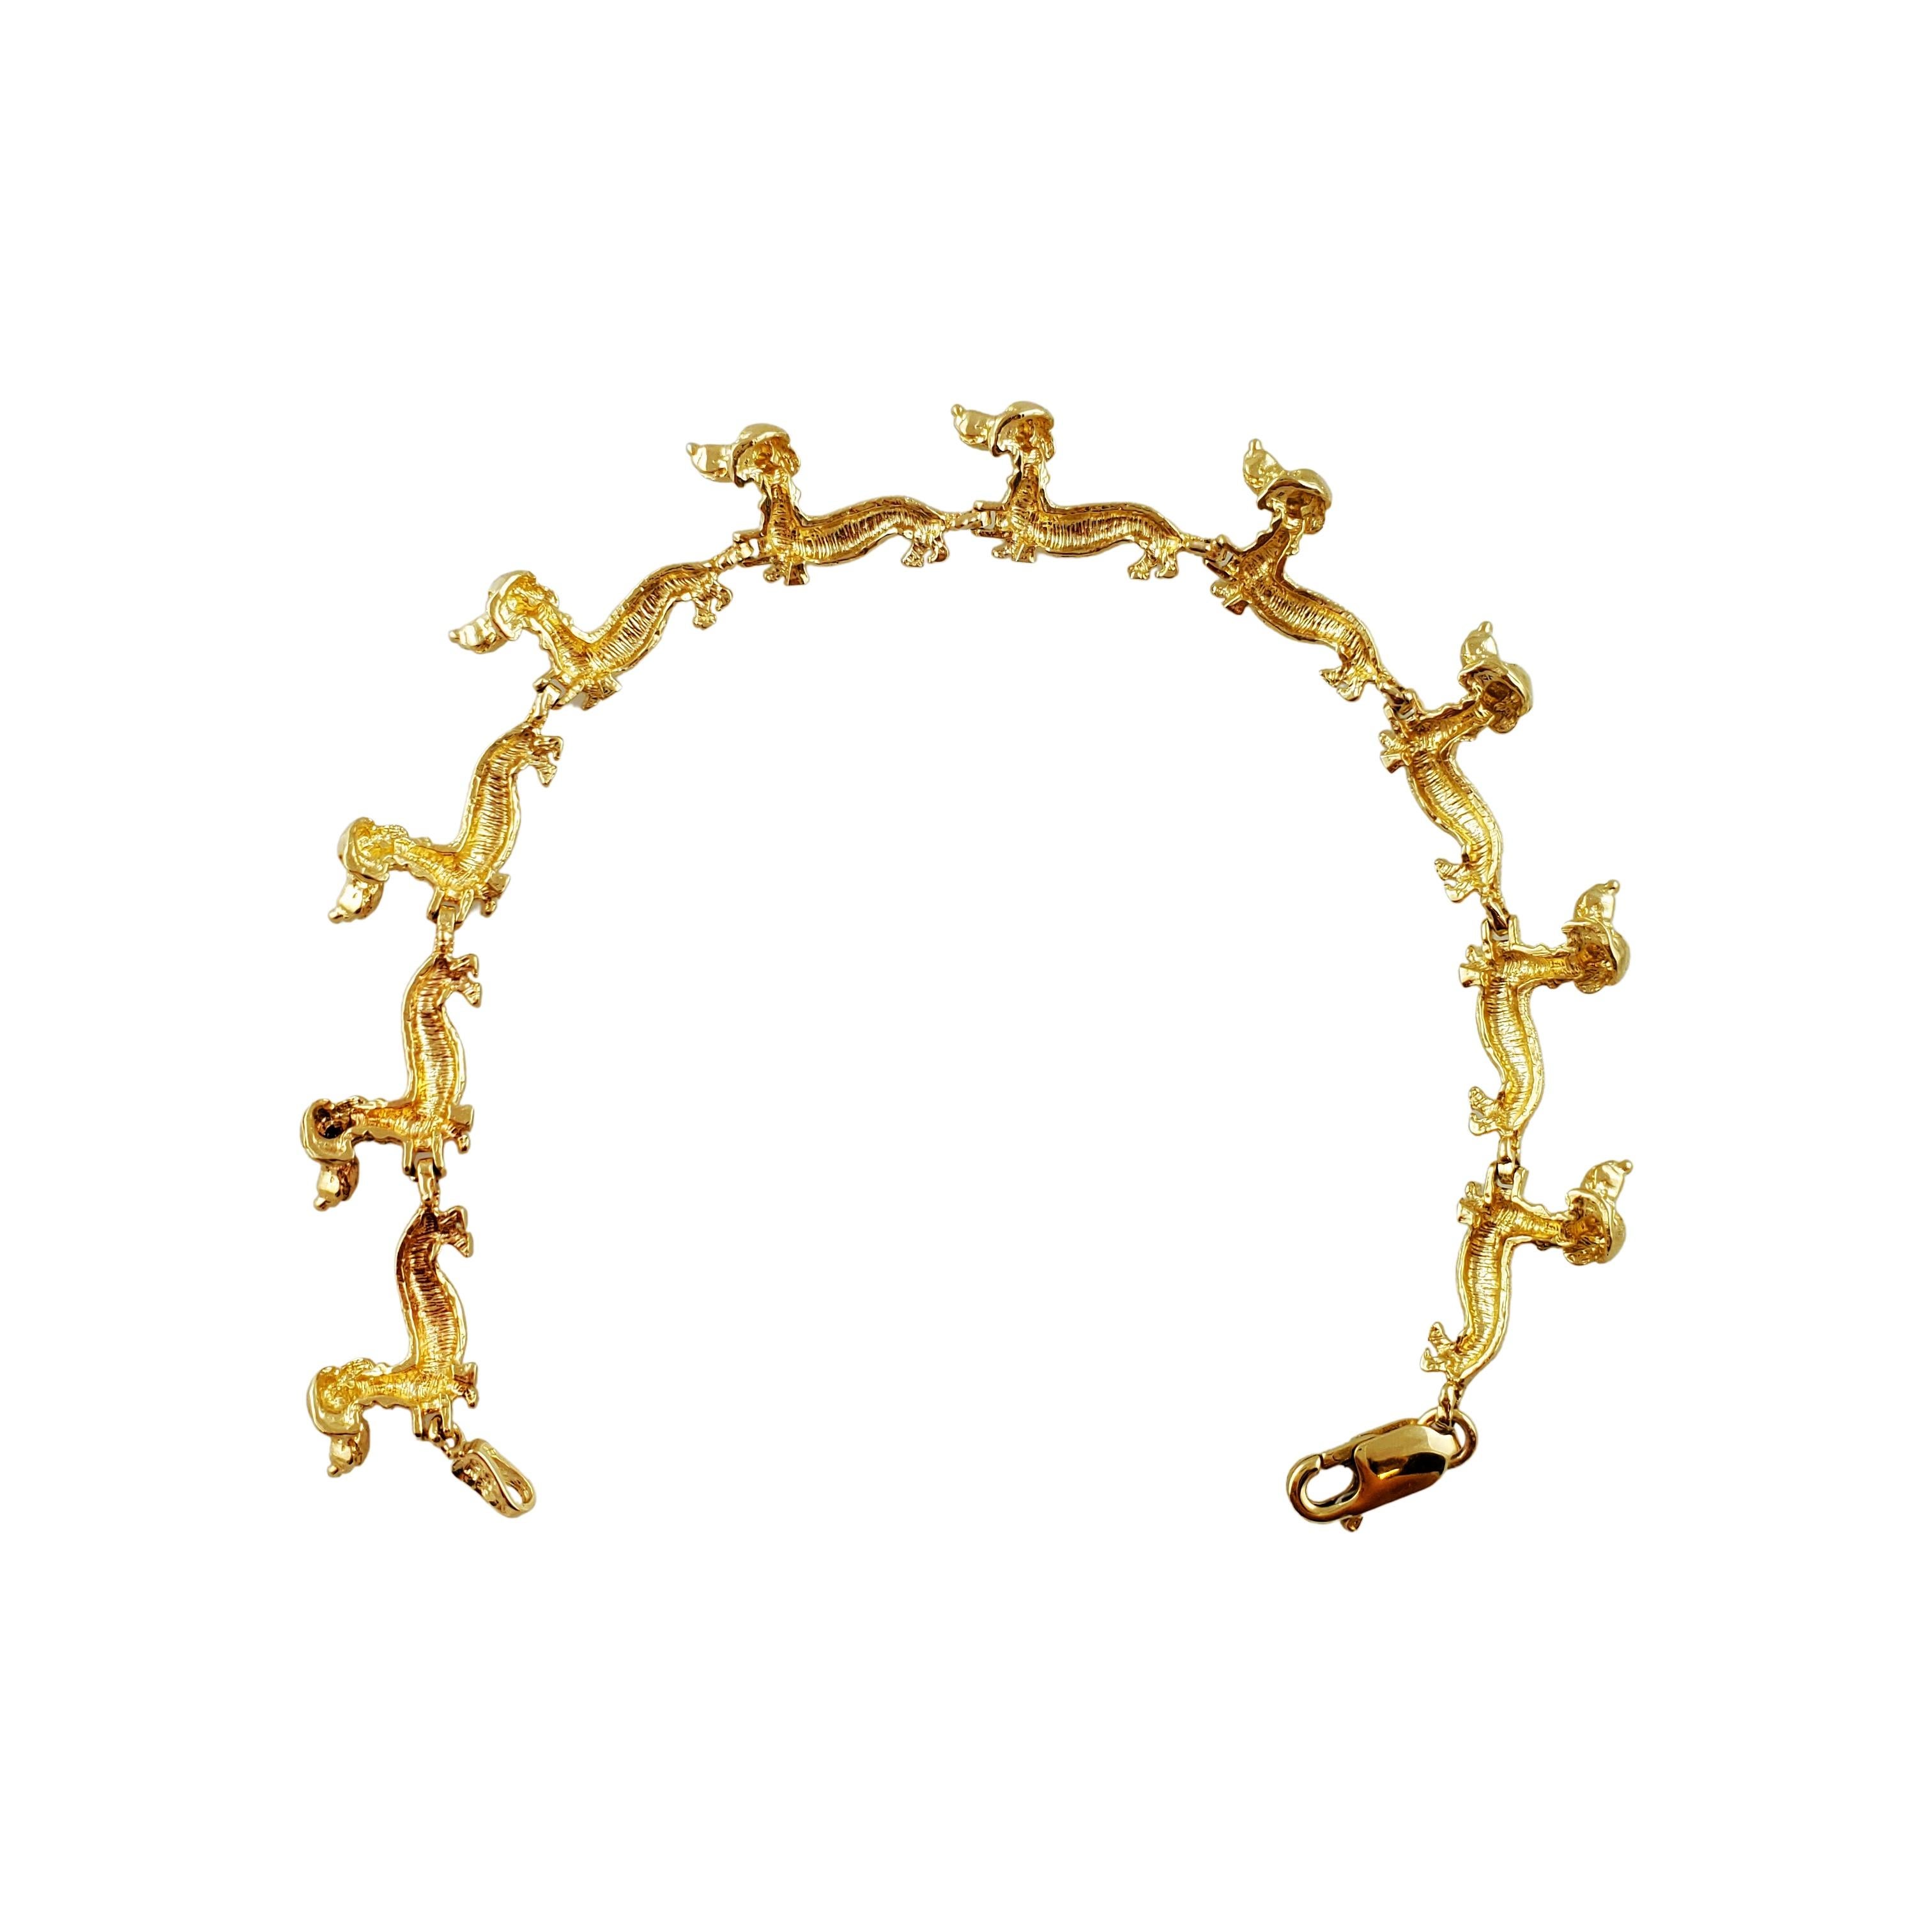 14K Yellow Gold Dachshund Link Bracelet

Adorable 14K yellow gold Dachshund Bracelet can become the perfect gift for any dog lover.

Size of Individual Dachshund: 20.5mm (from nose to tail) 10.5mm (from crown to feet)

Bracelet Size: 7'11